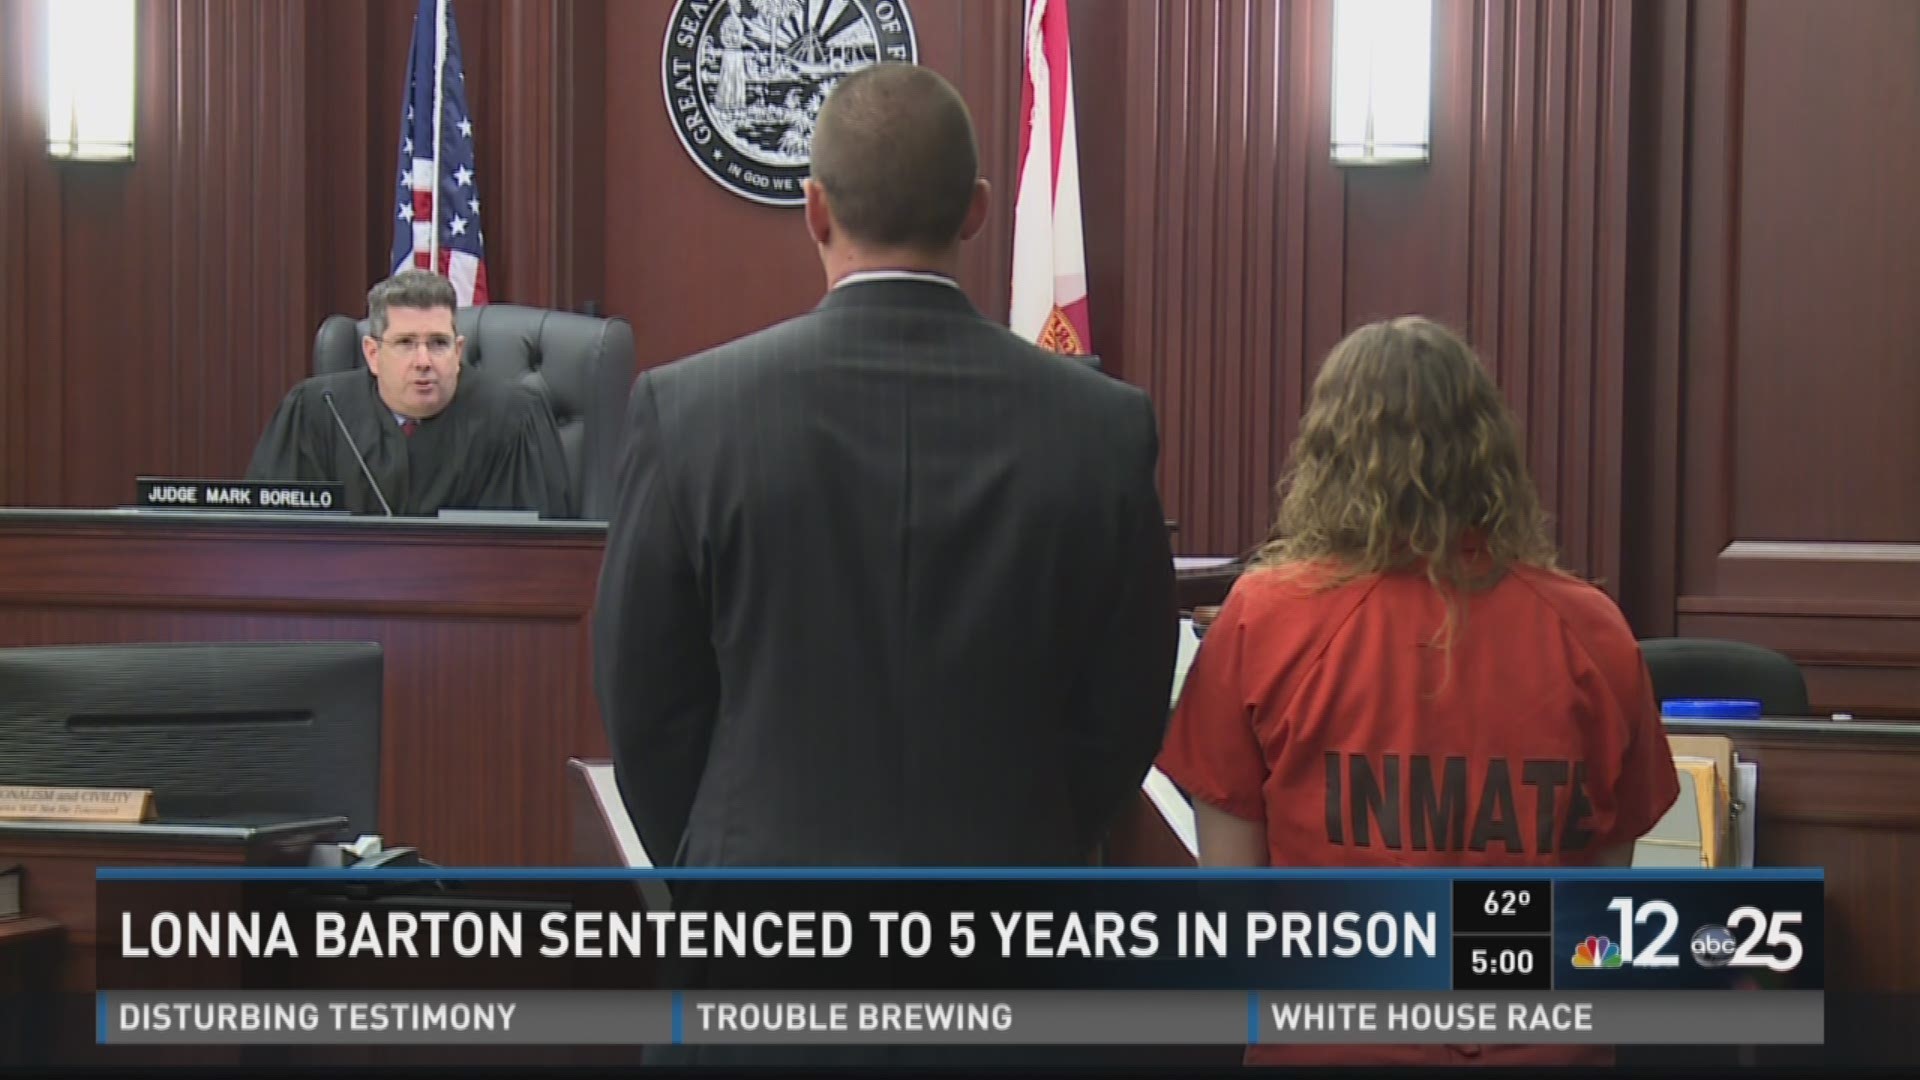 Lonna Barton sentenced to 5 years in prison